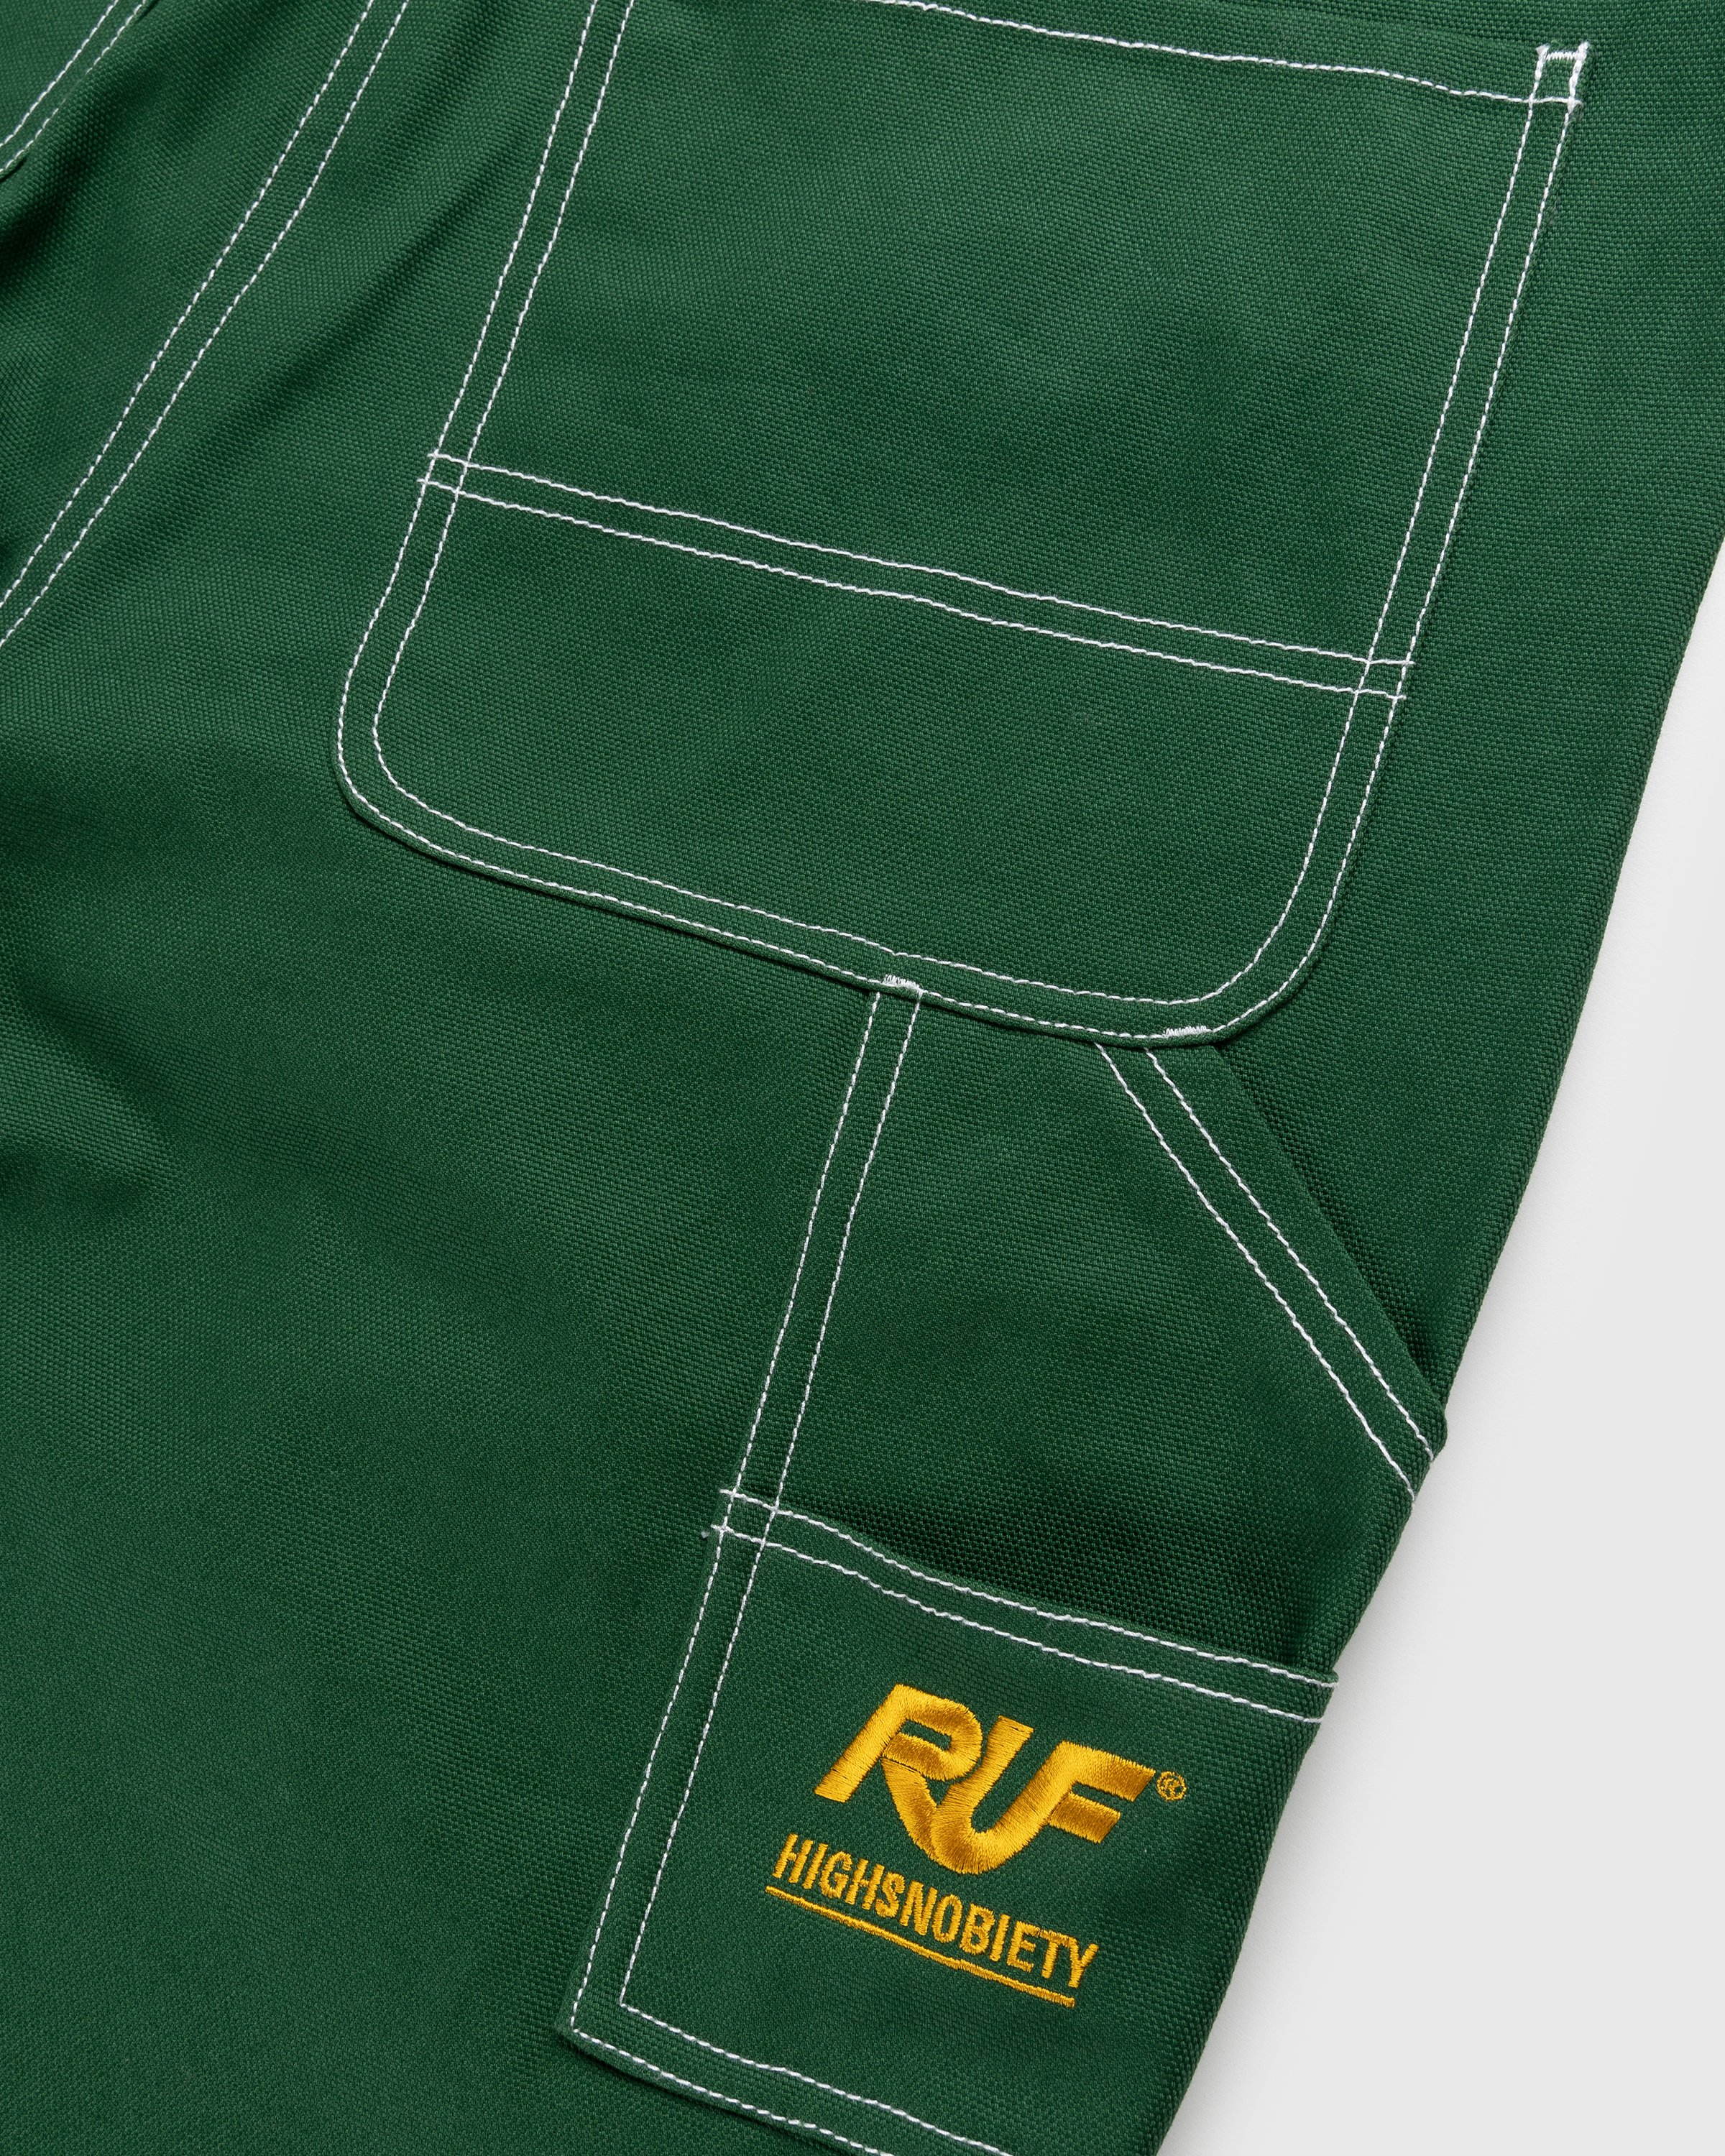 RUF x Highsnobiety - Cotton Overalls Green - Clothing - Green - Image 7